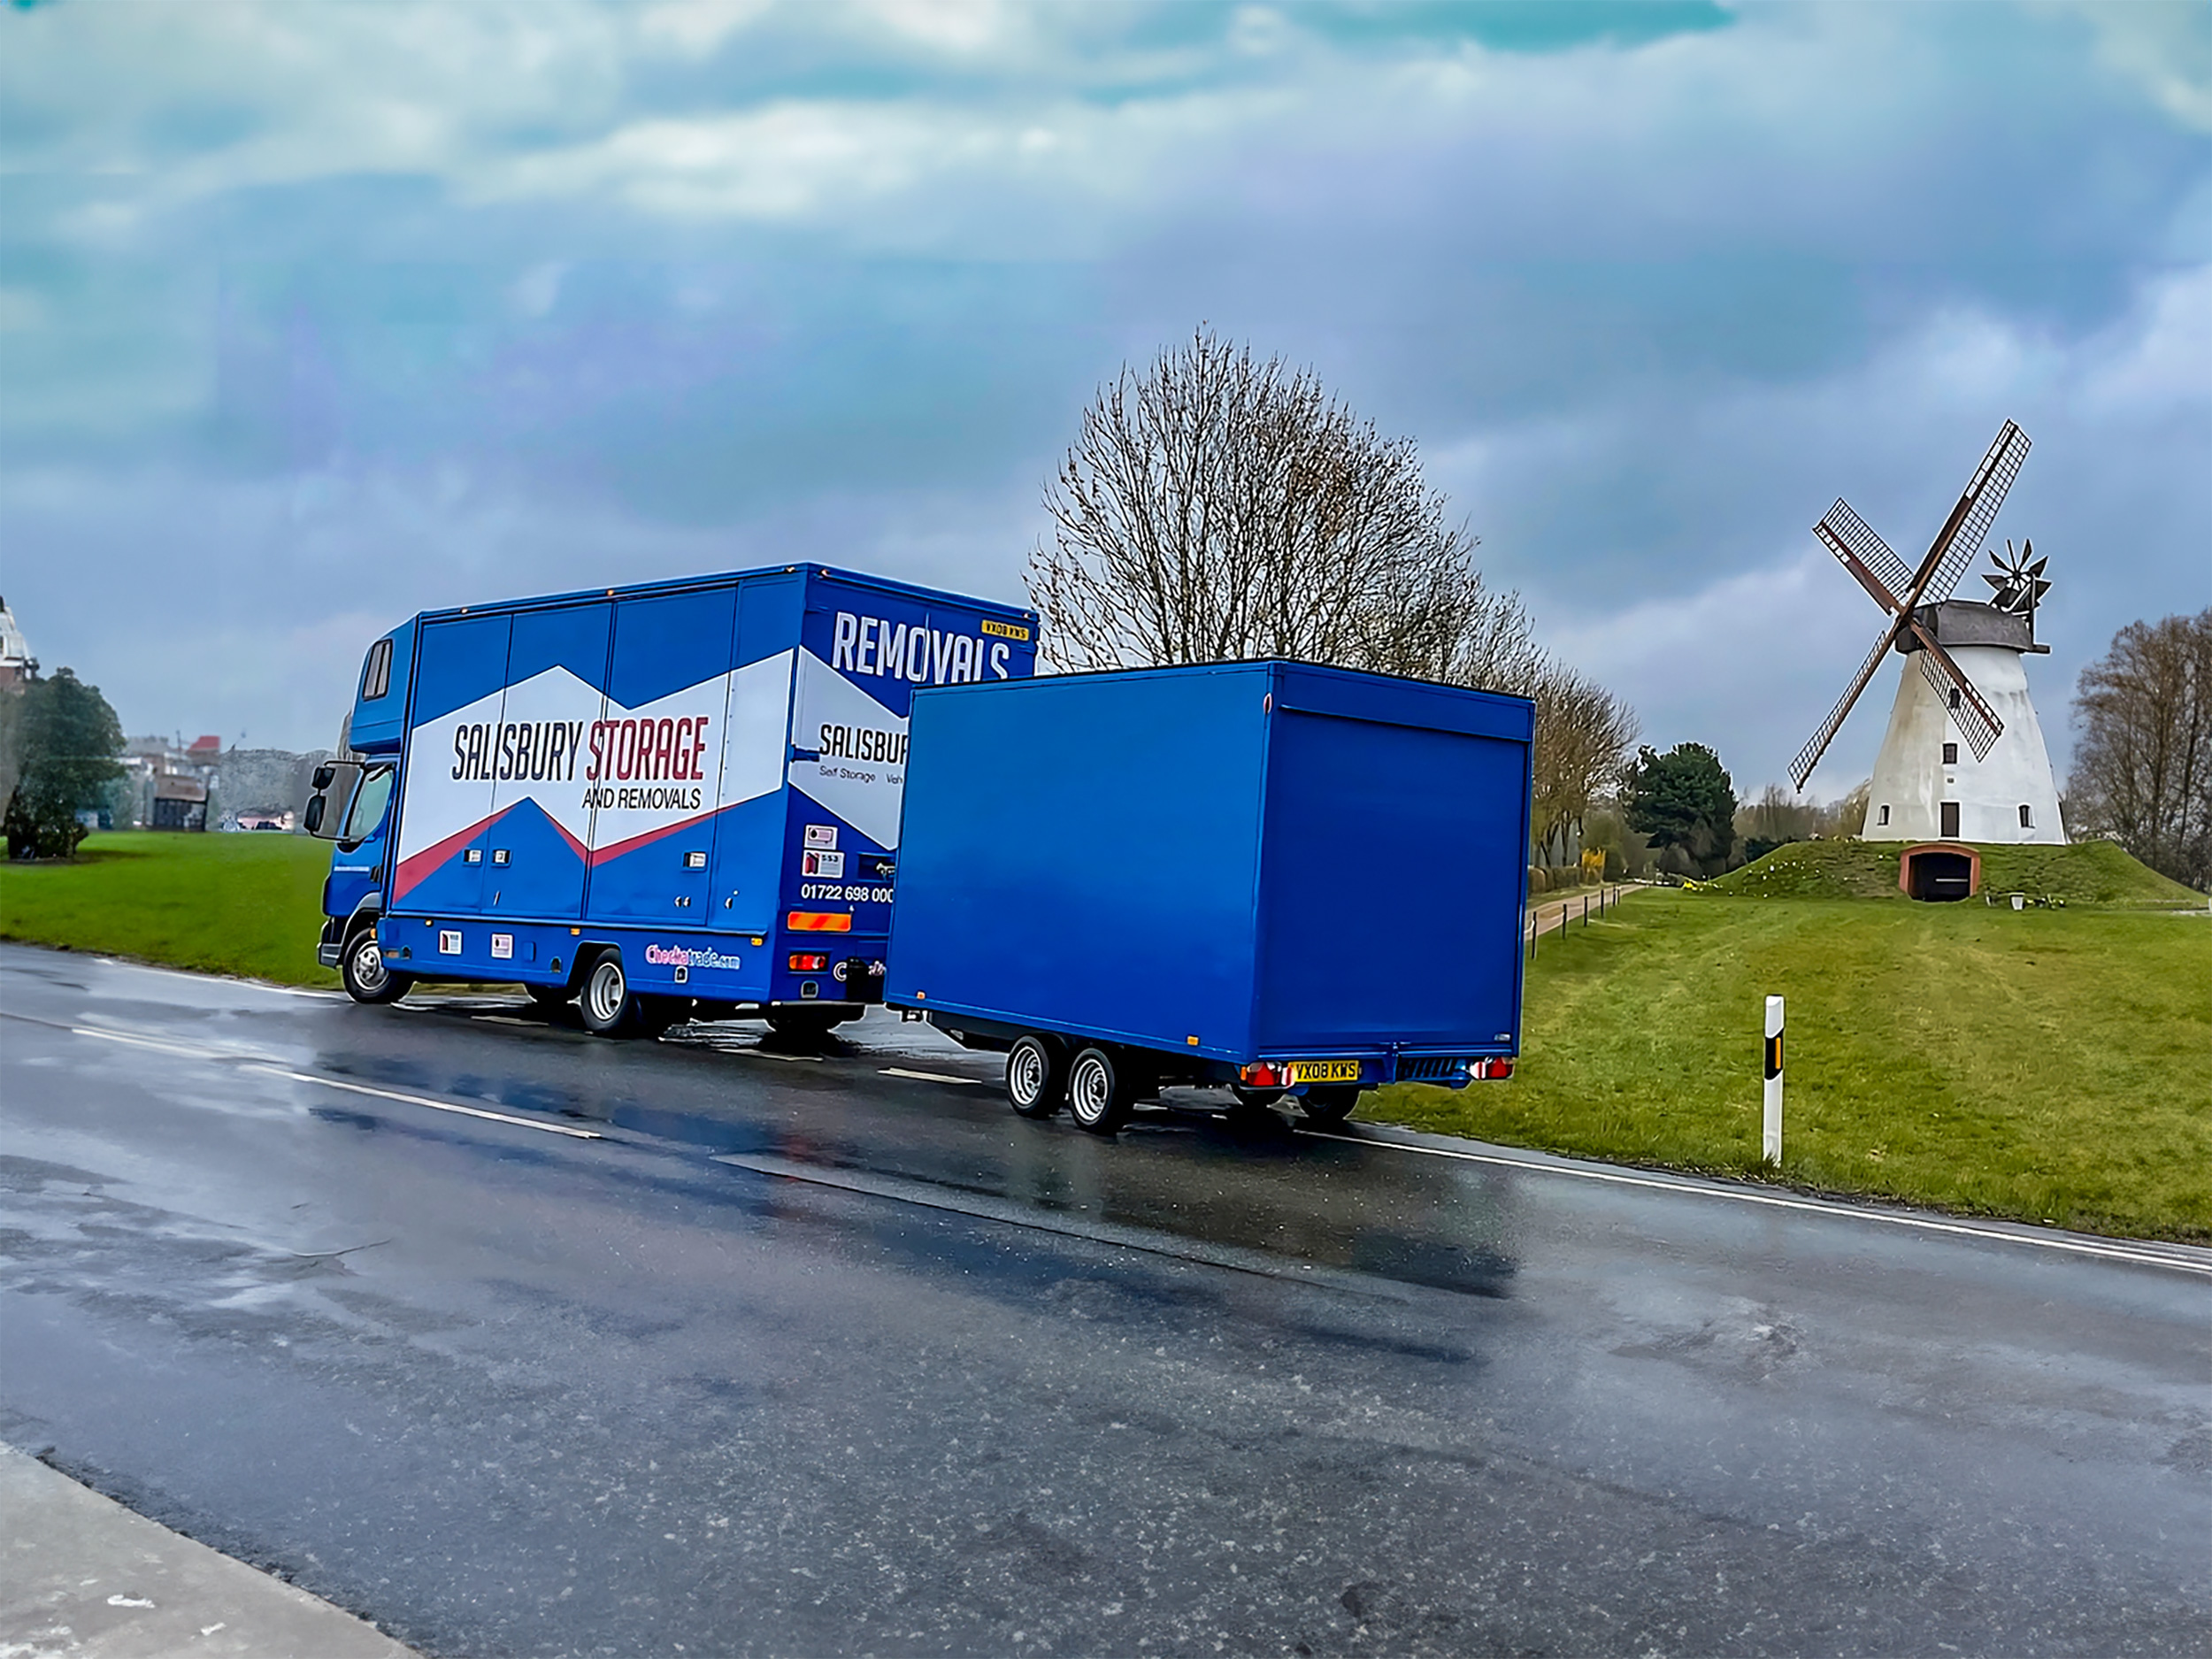 A blue salisbury storage and removals lorry pulling a blue trailer journeying through a european country.